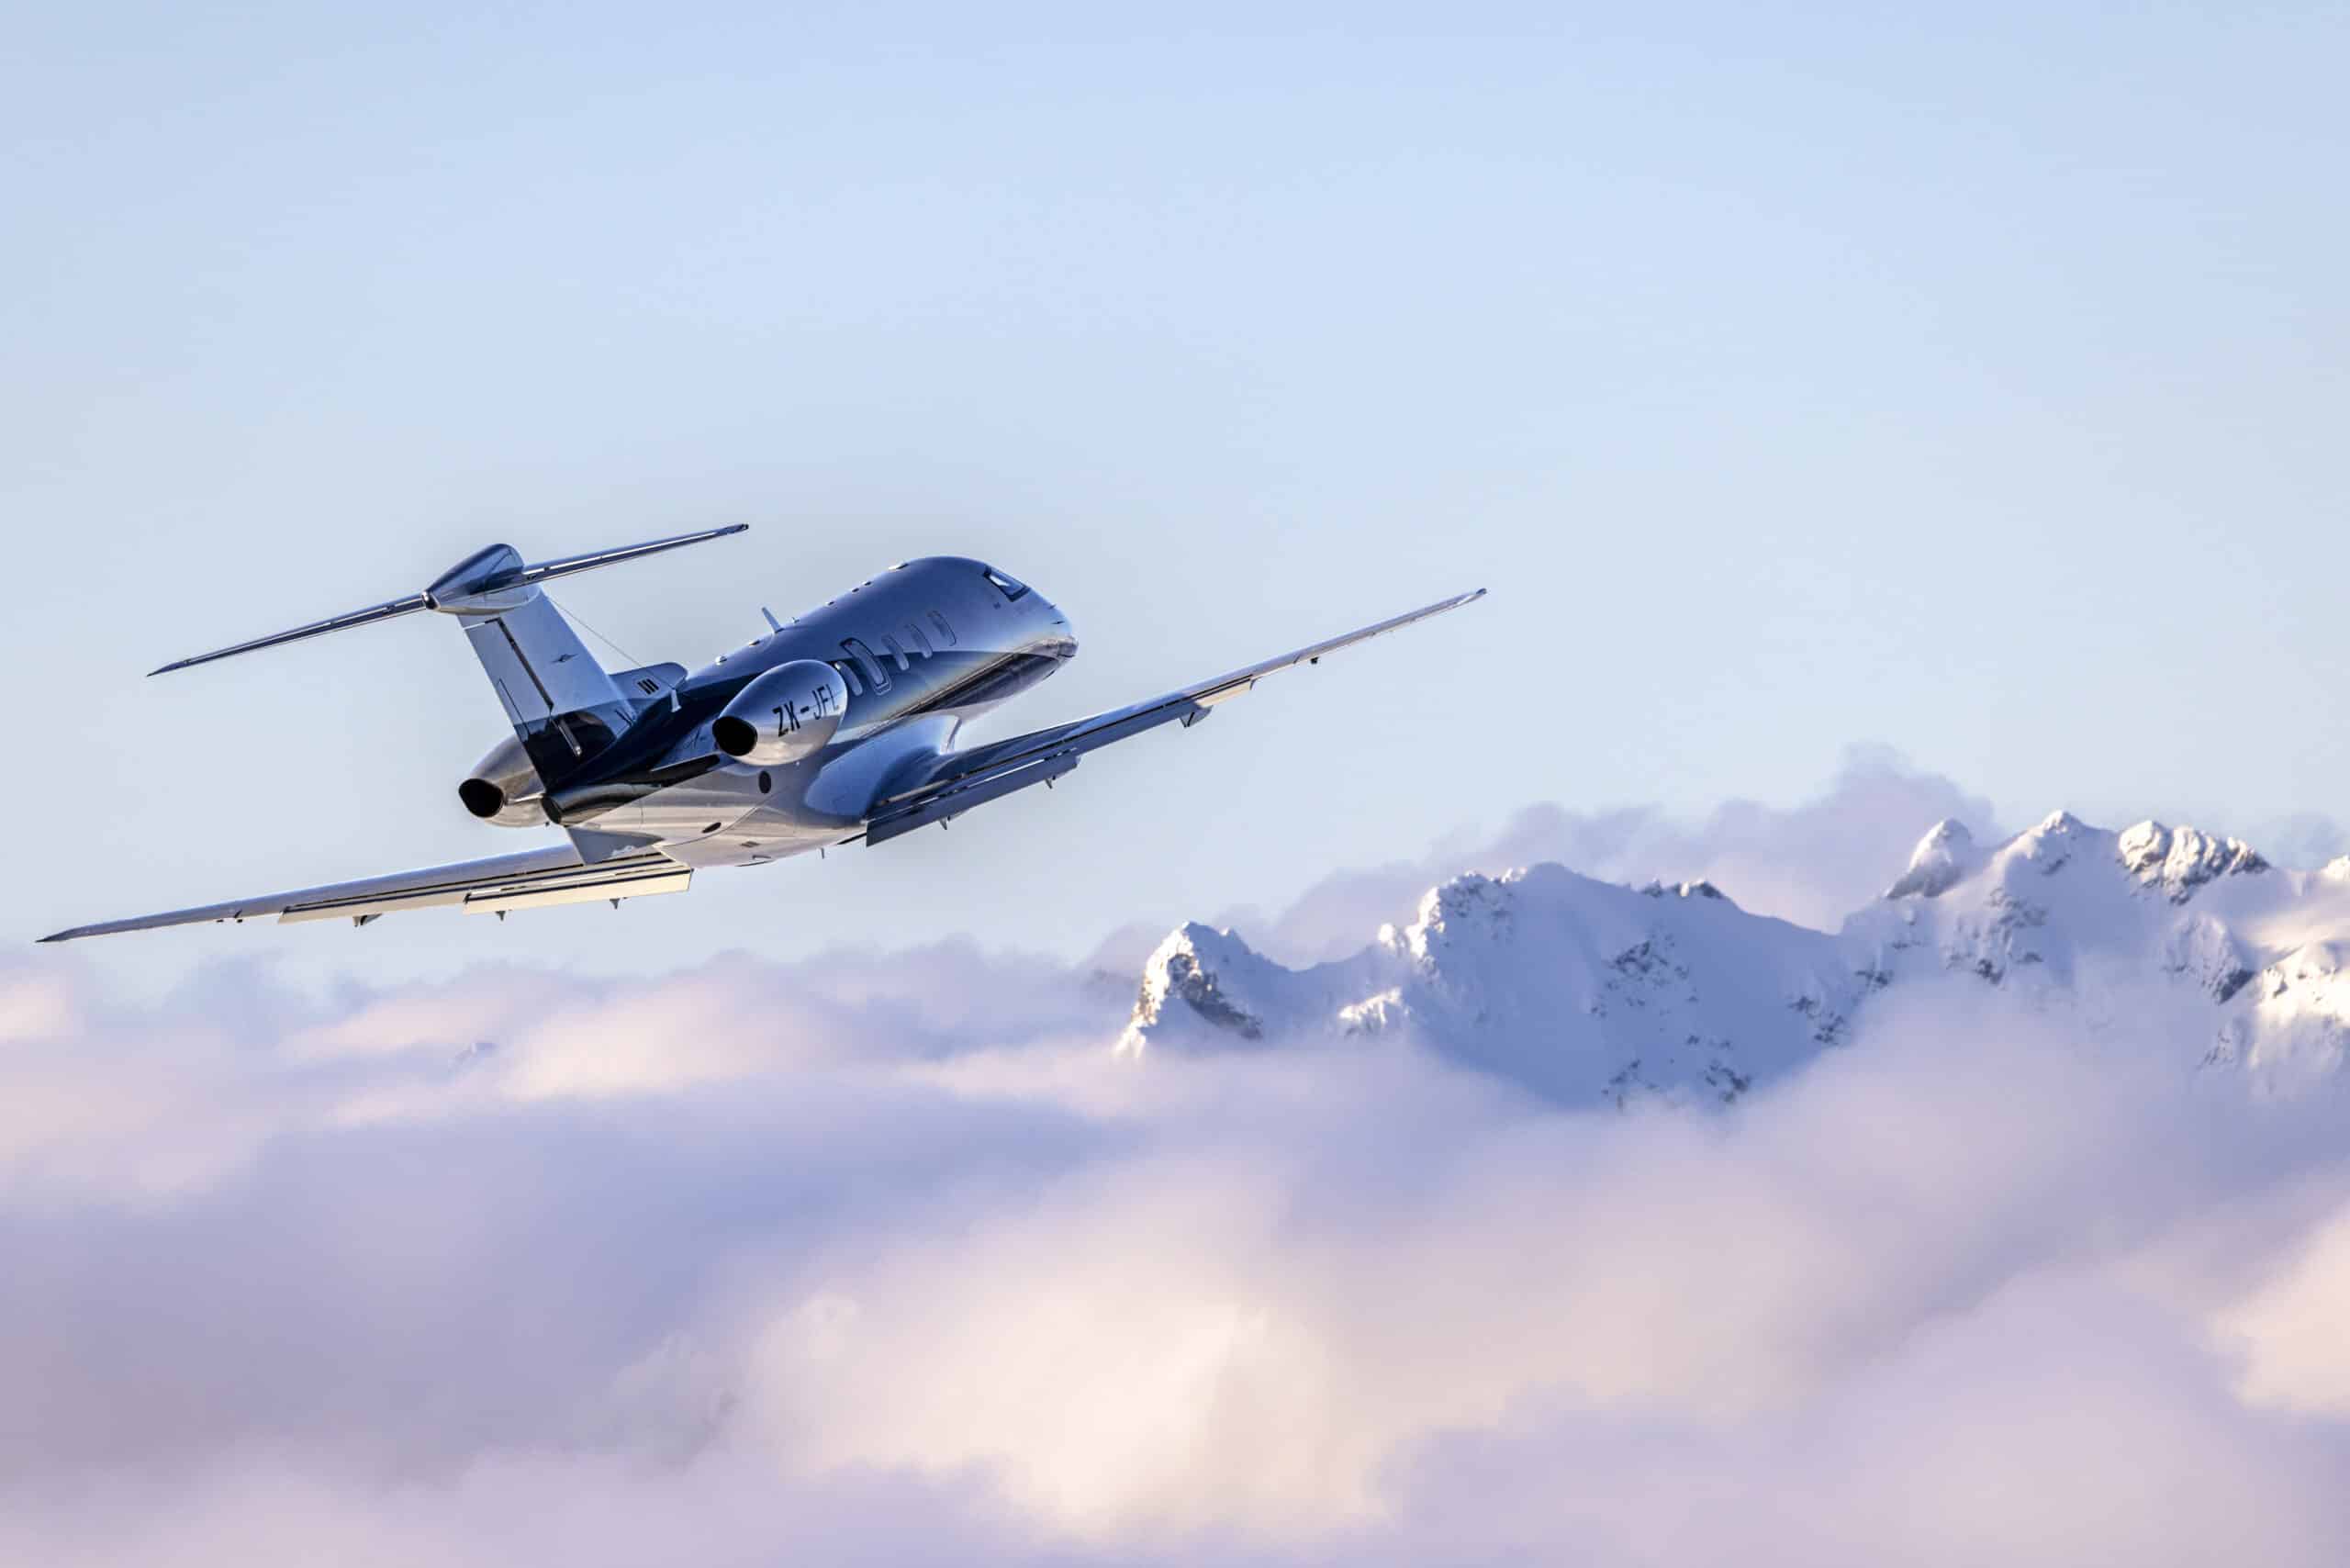 The New PC-24 Is Here: More Range, More Payload, and Even More Possibilities